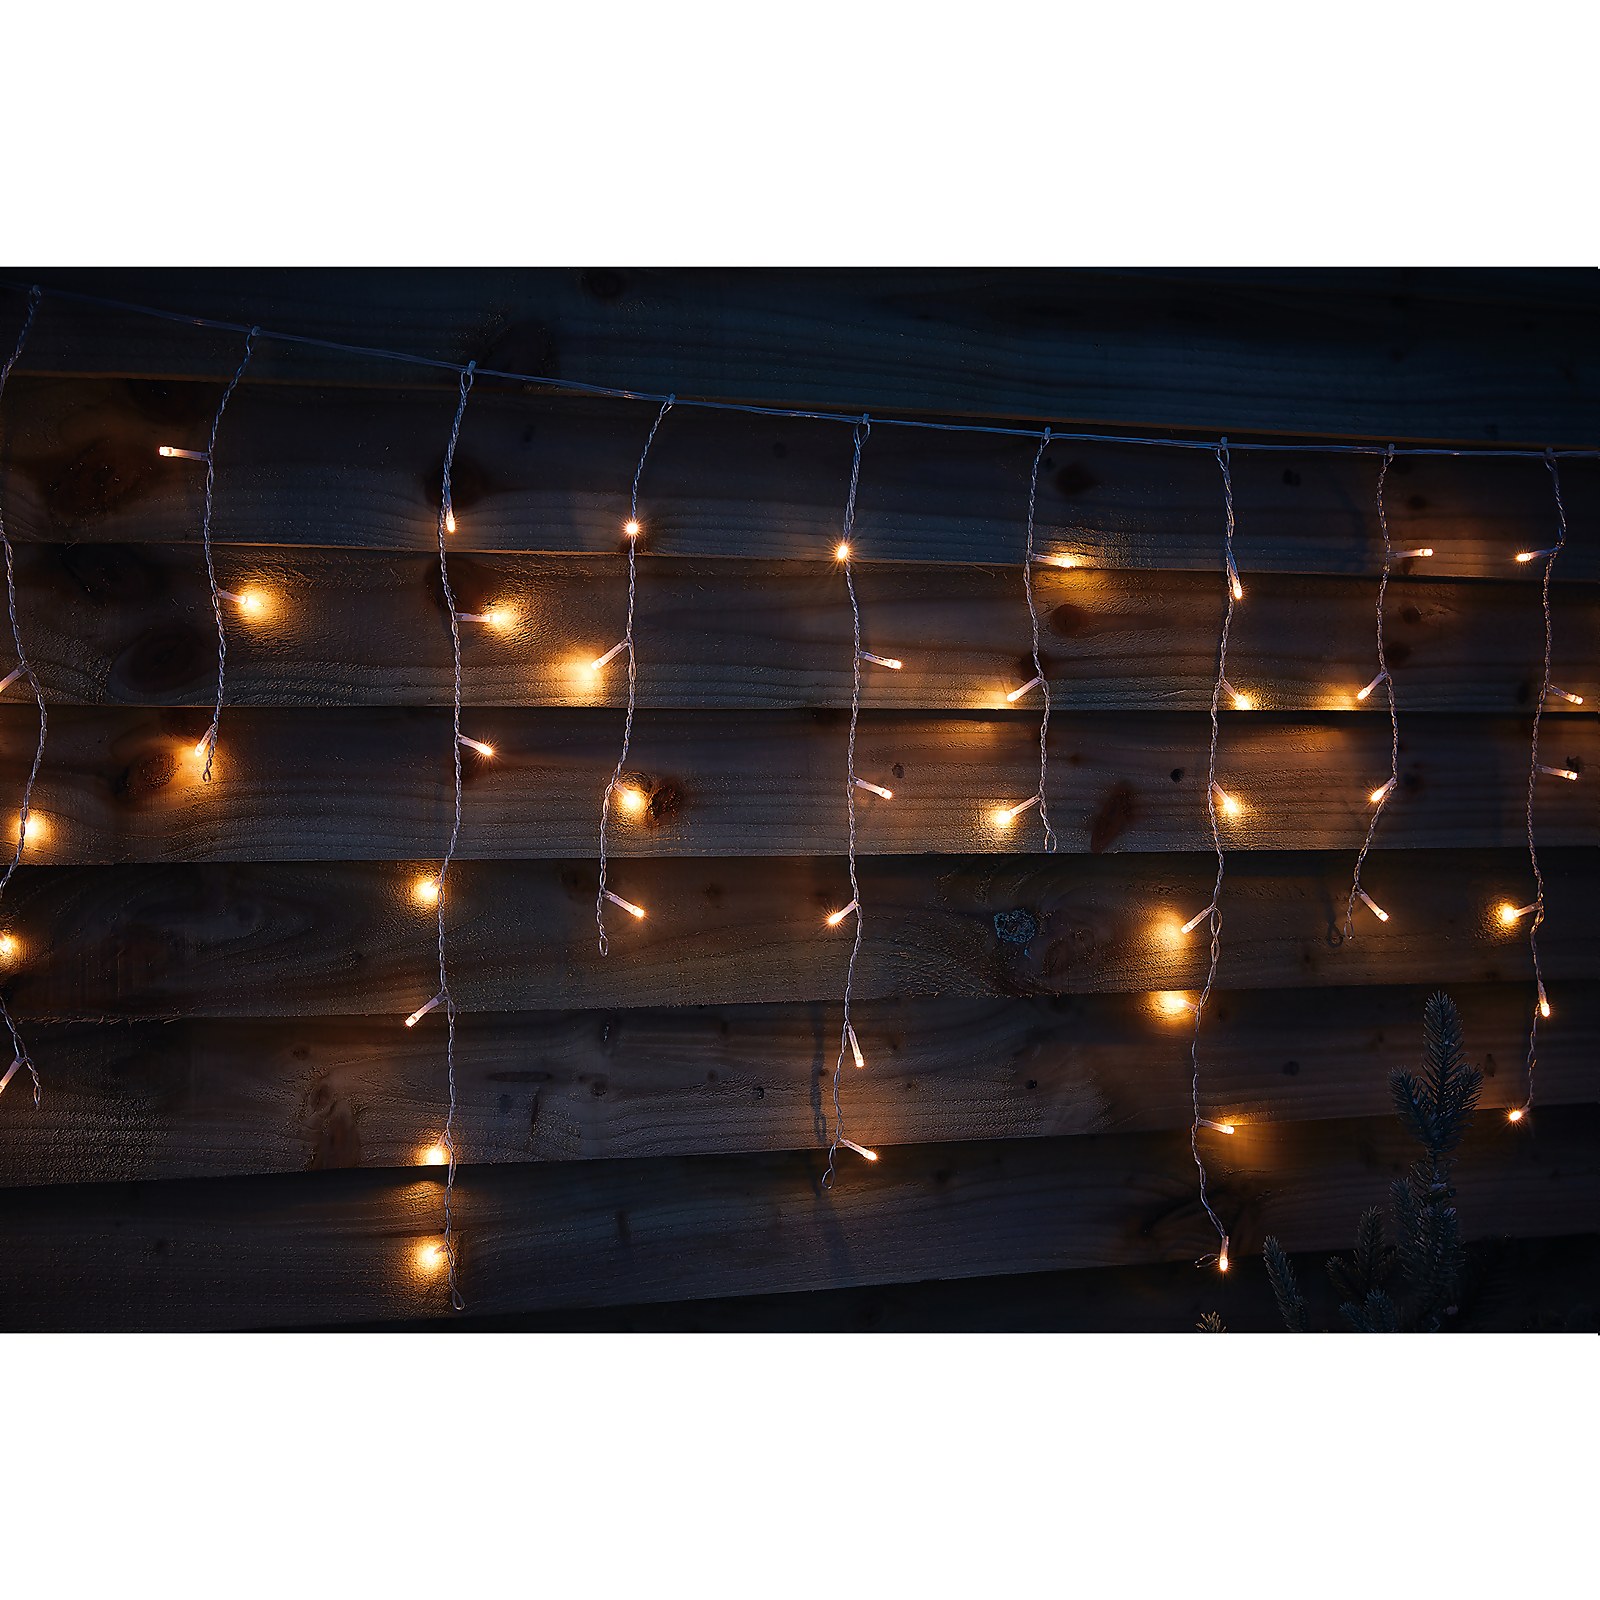 Photo of 240 Led Timer Icicle String Christmas Lights - Warm White